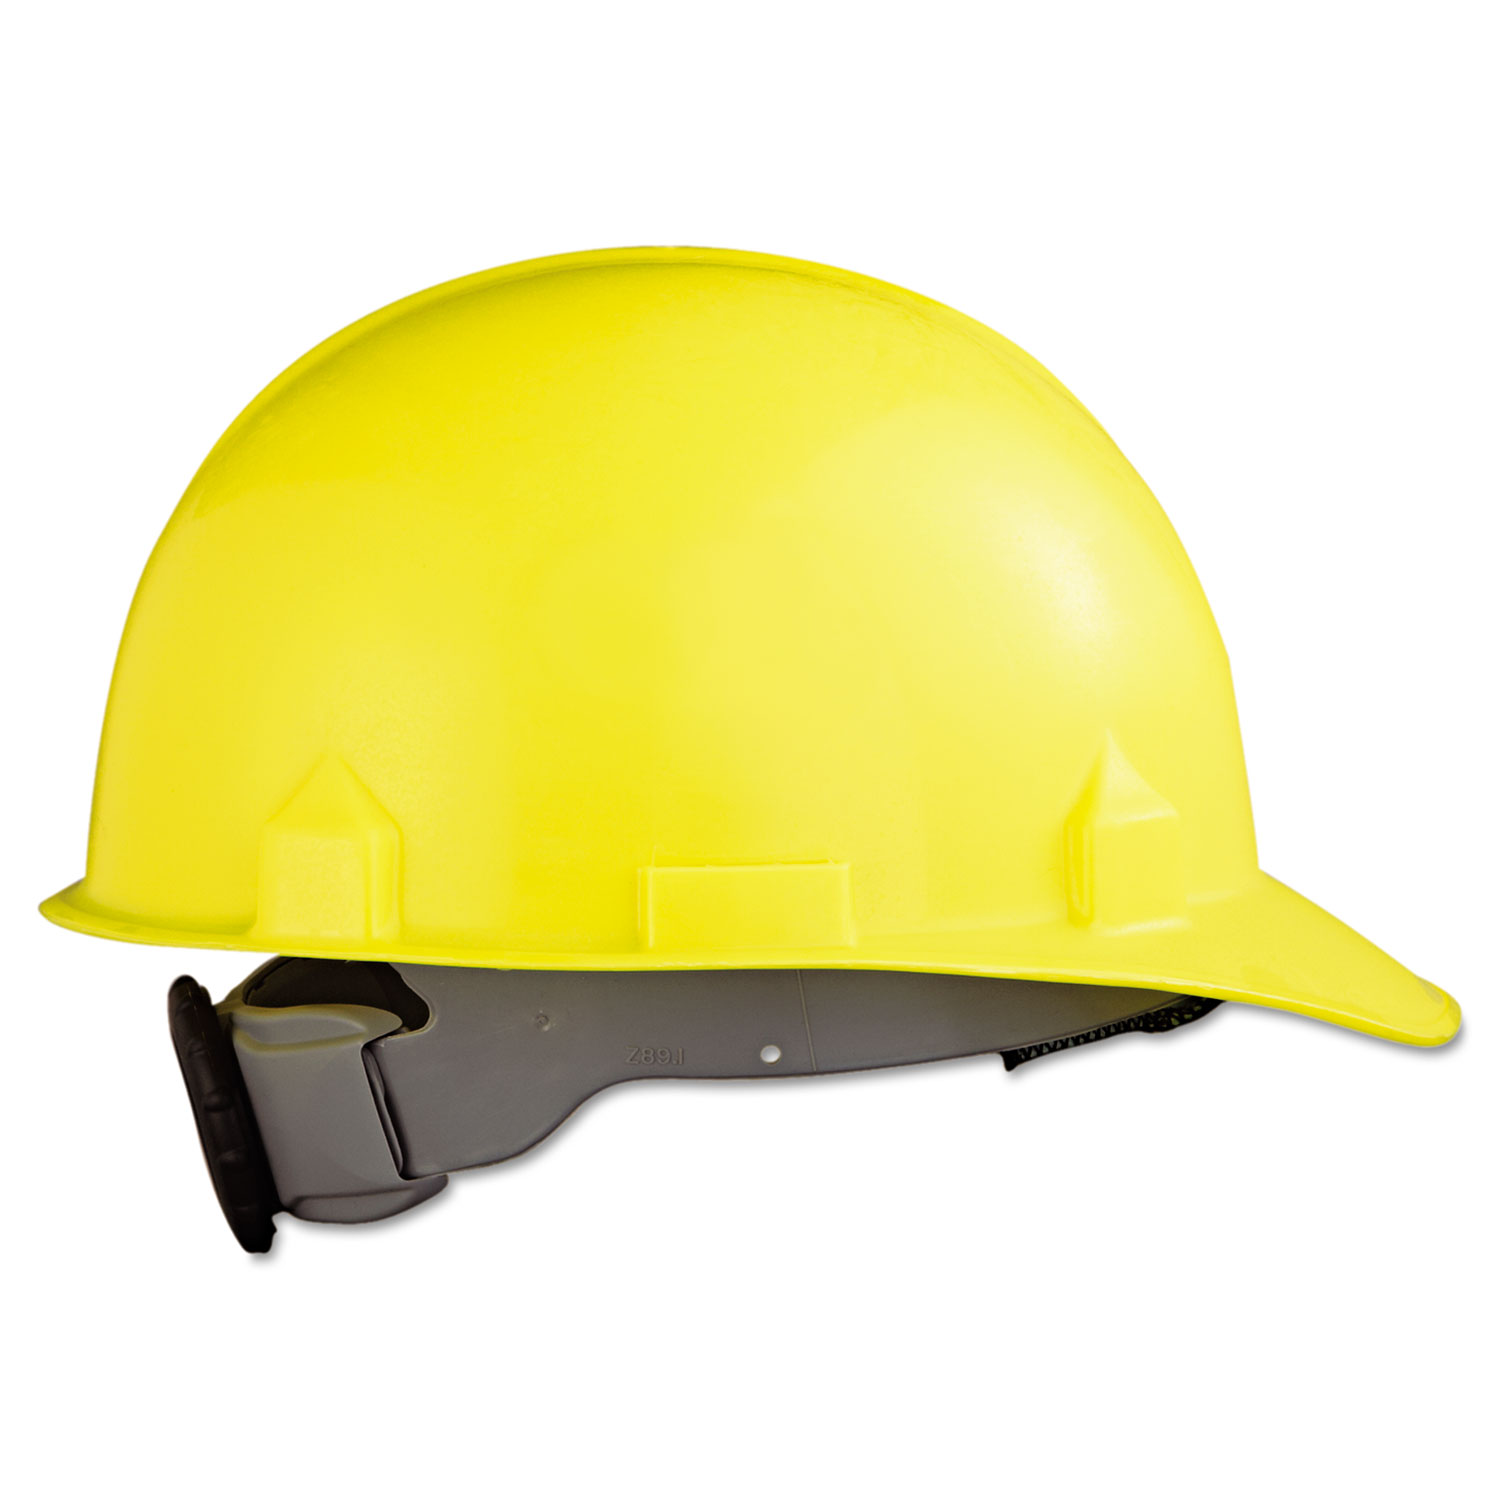 SC-6 Head Protection w/4-Point Suspension, Yellow